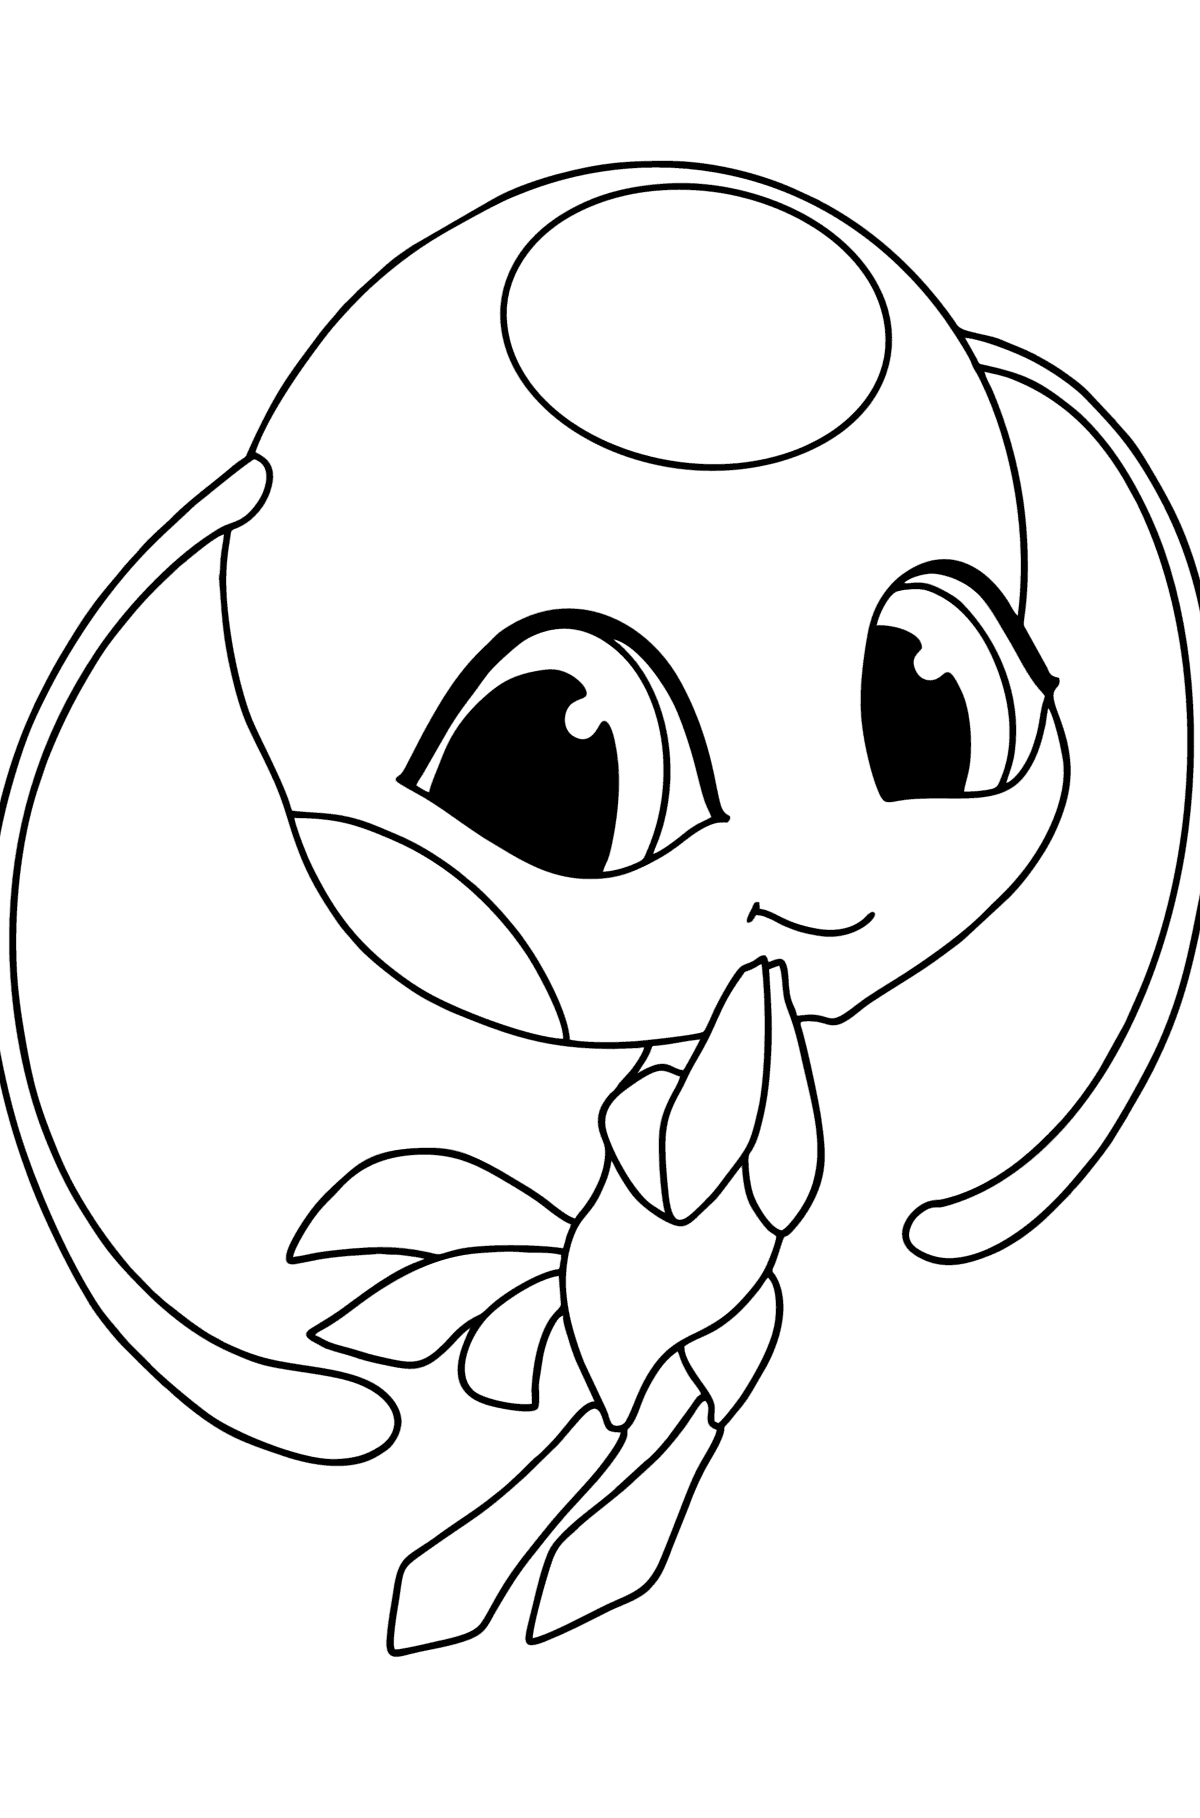 Kwami Tiggy coloring page - Coloring Pages for Kids